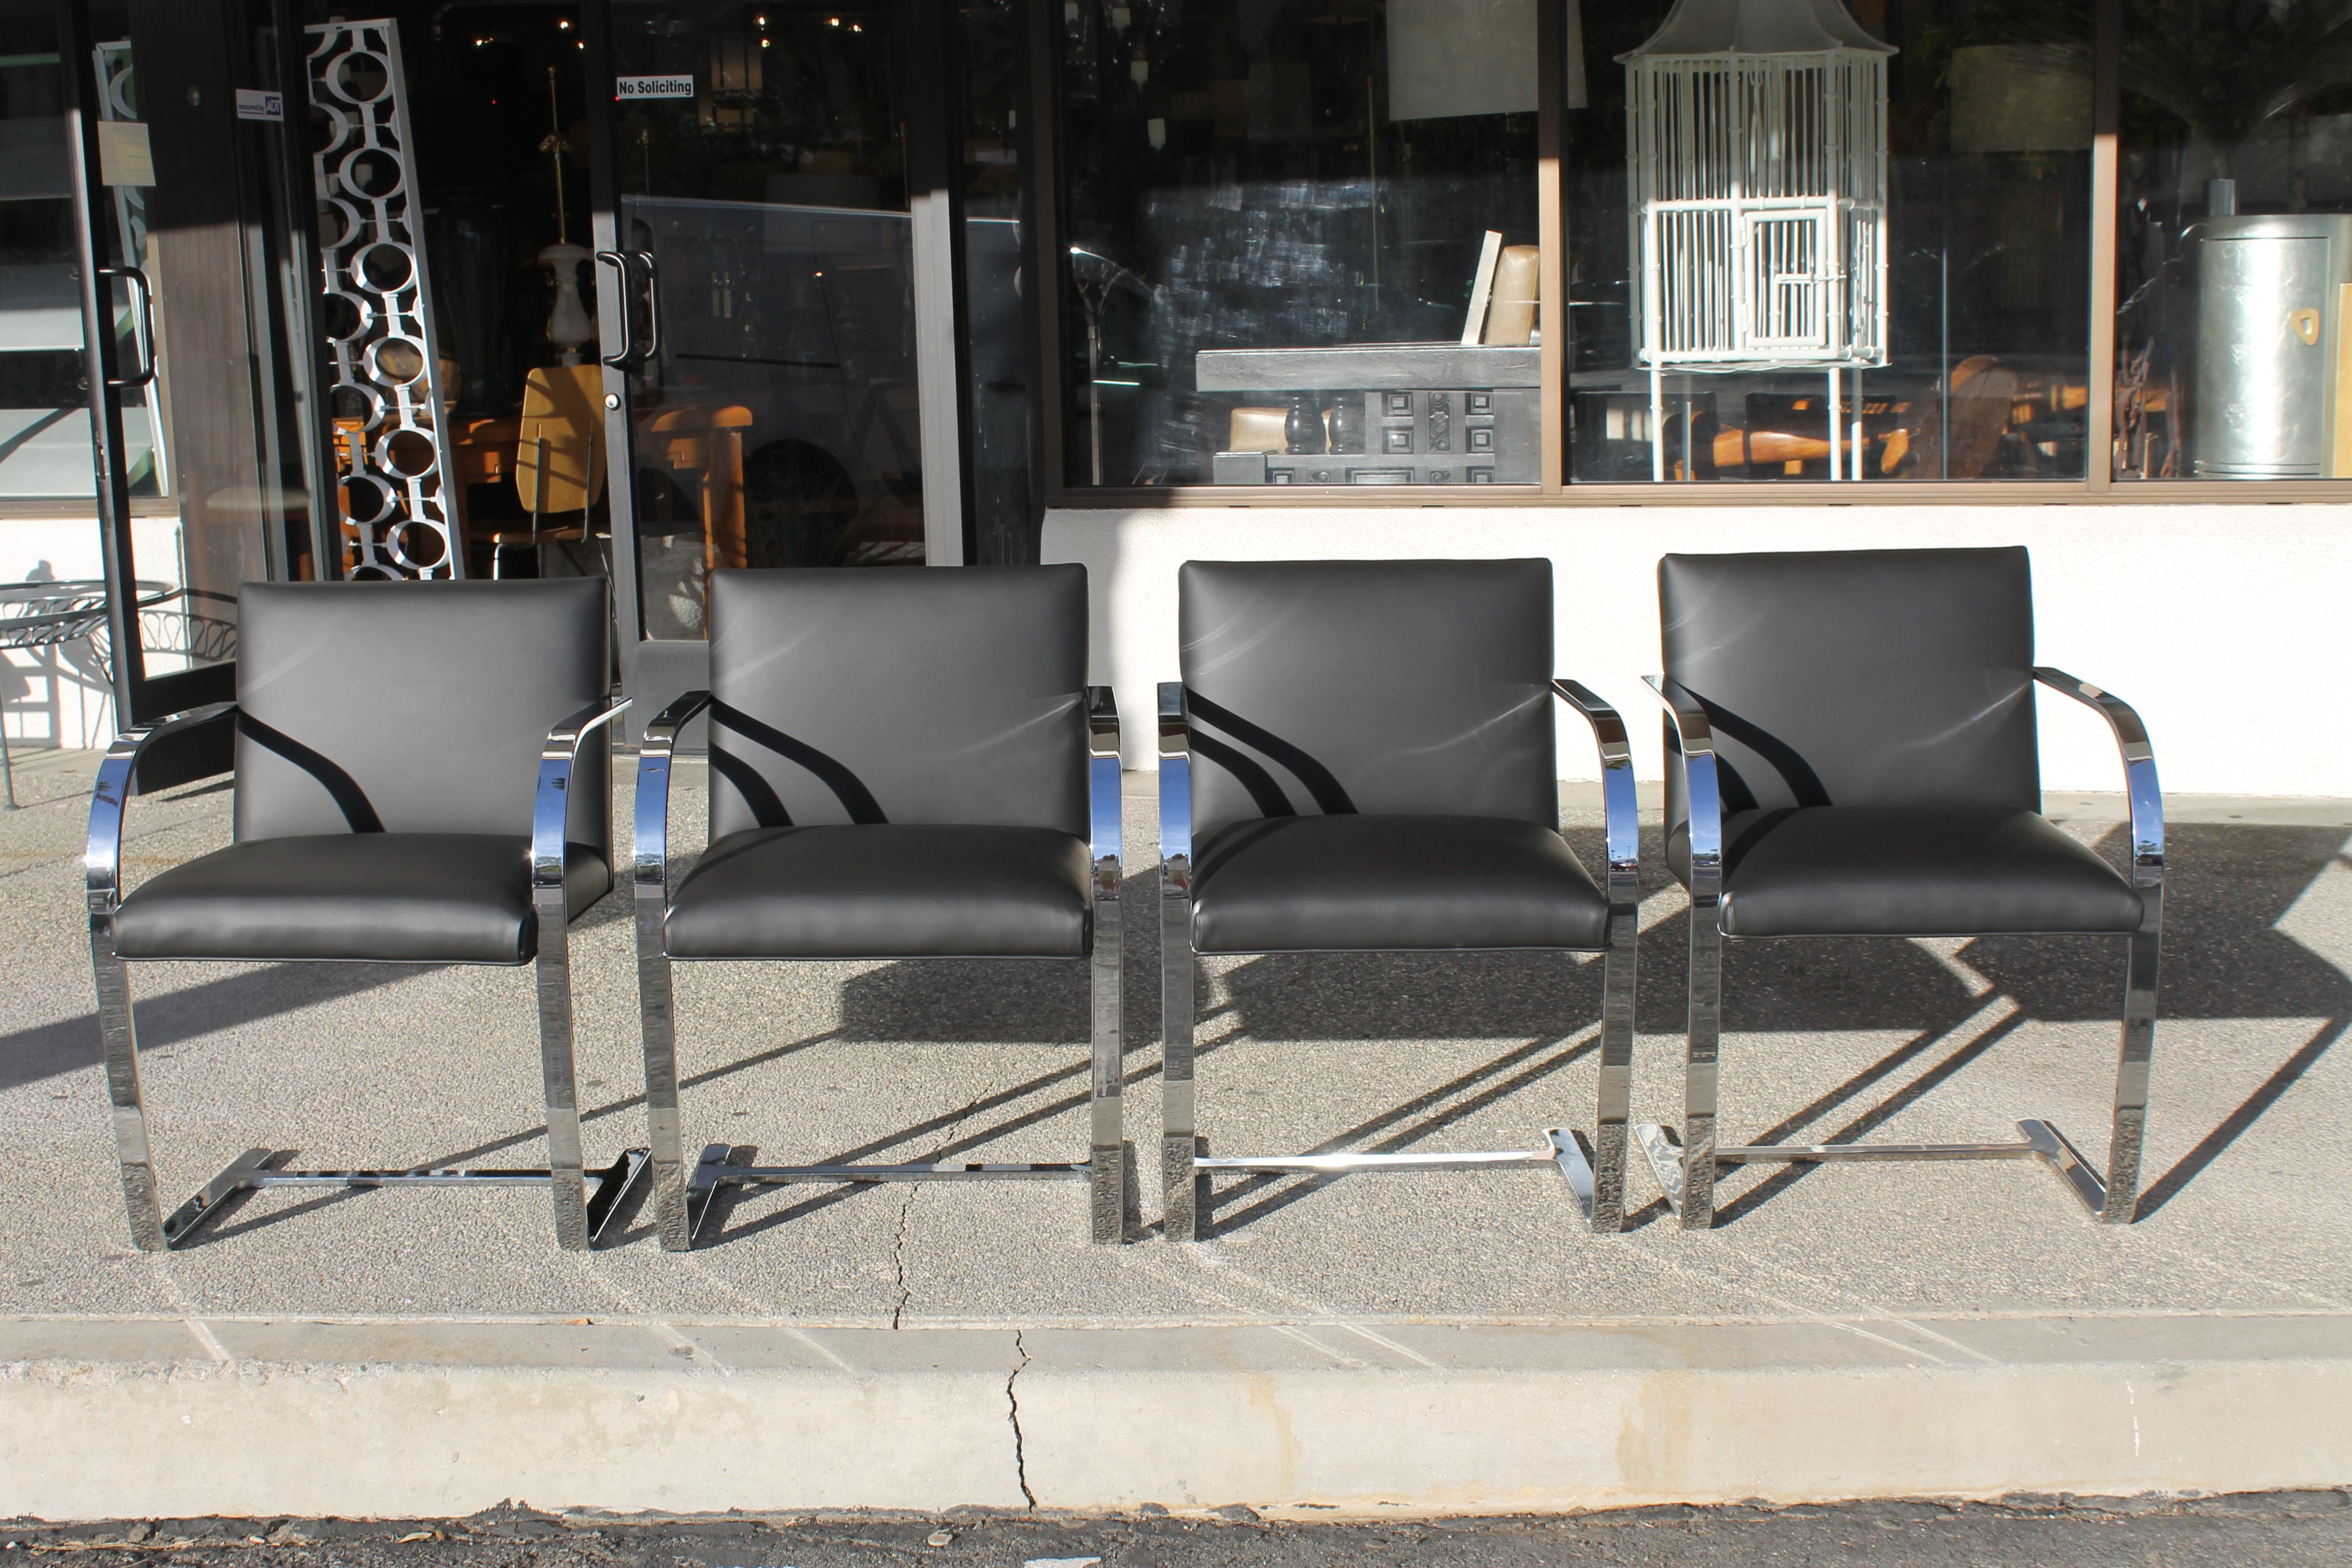 Four Mies van der Rohe Brno chairs made by Gordon International, Brooklyn, N.Y. Chairs are chromed steel with new recycled leather. Each chair measures: 22.5